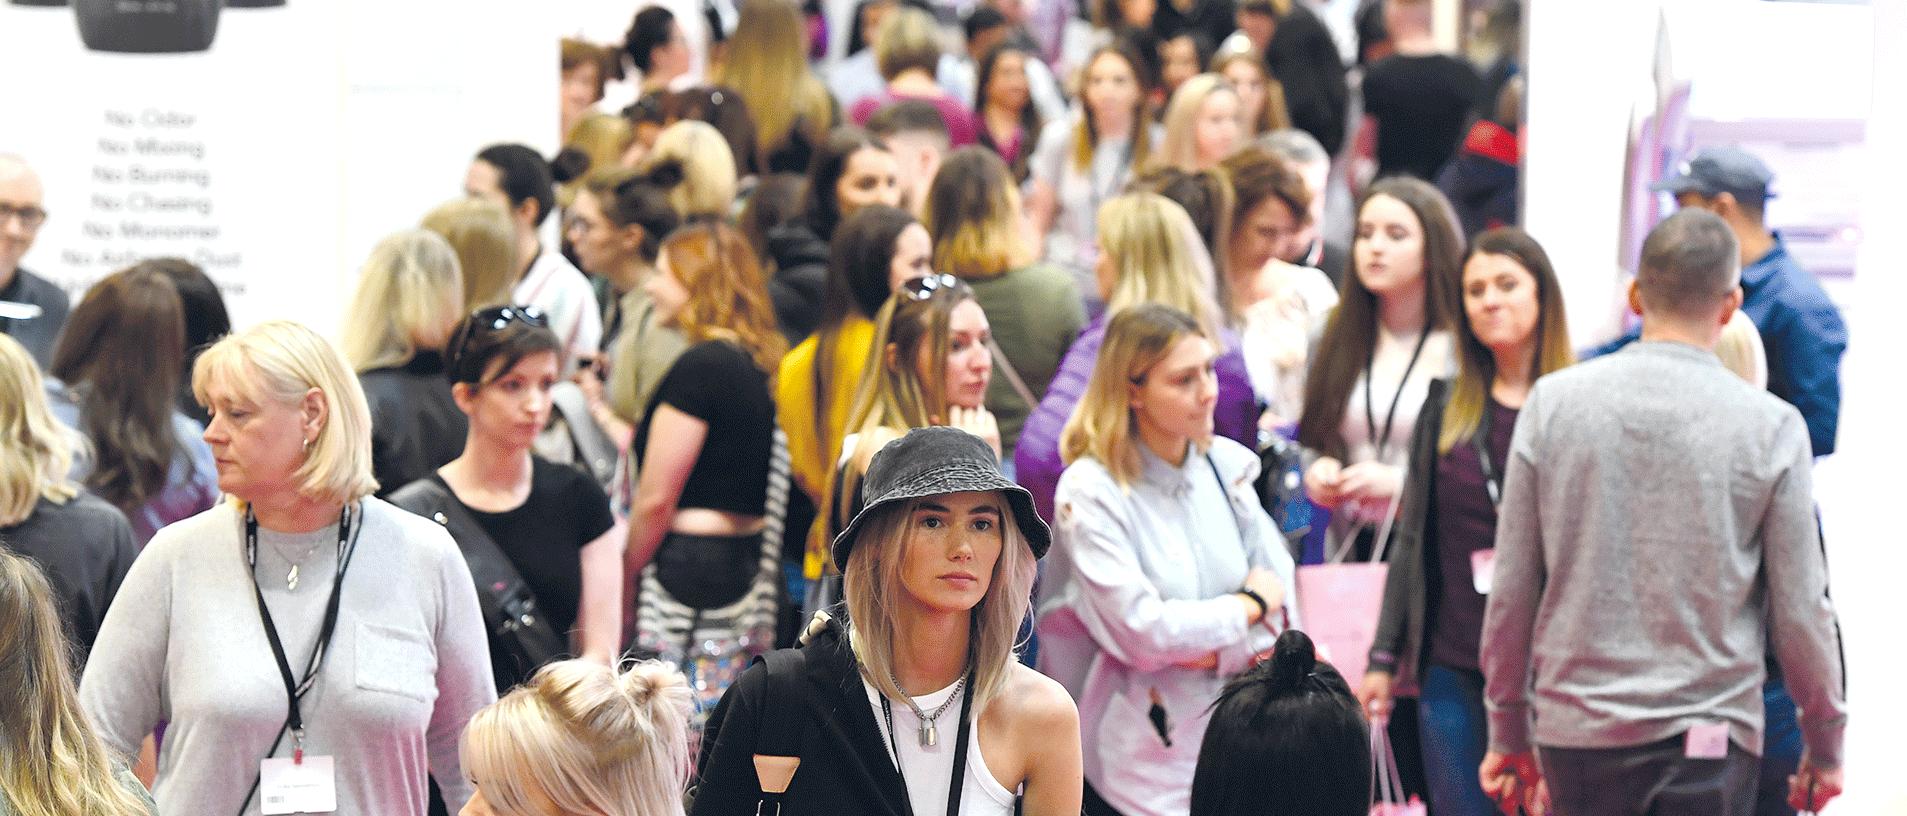 The Biggest Beauty and Shopping Event of the Year